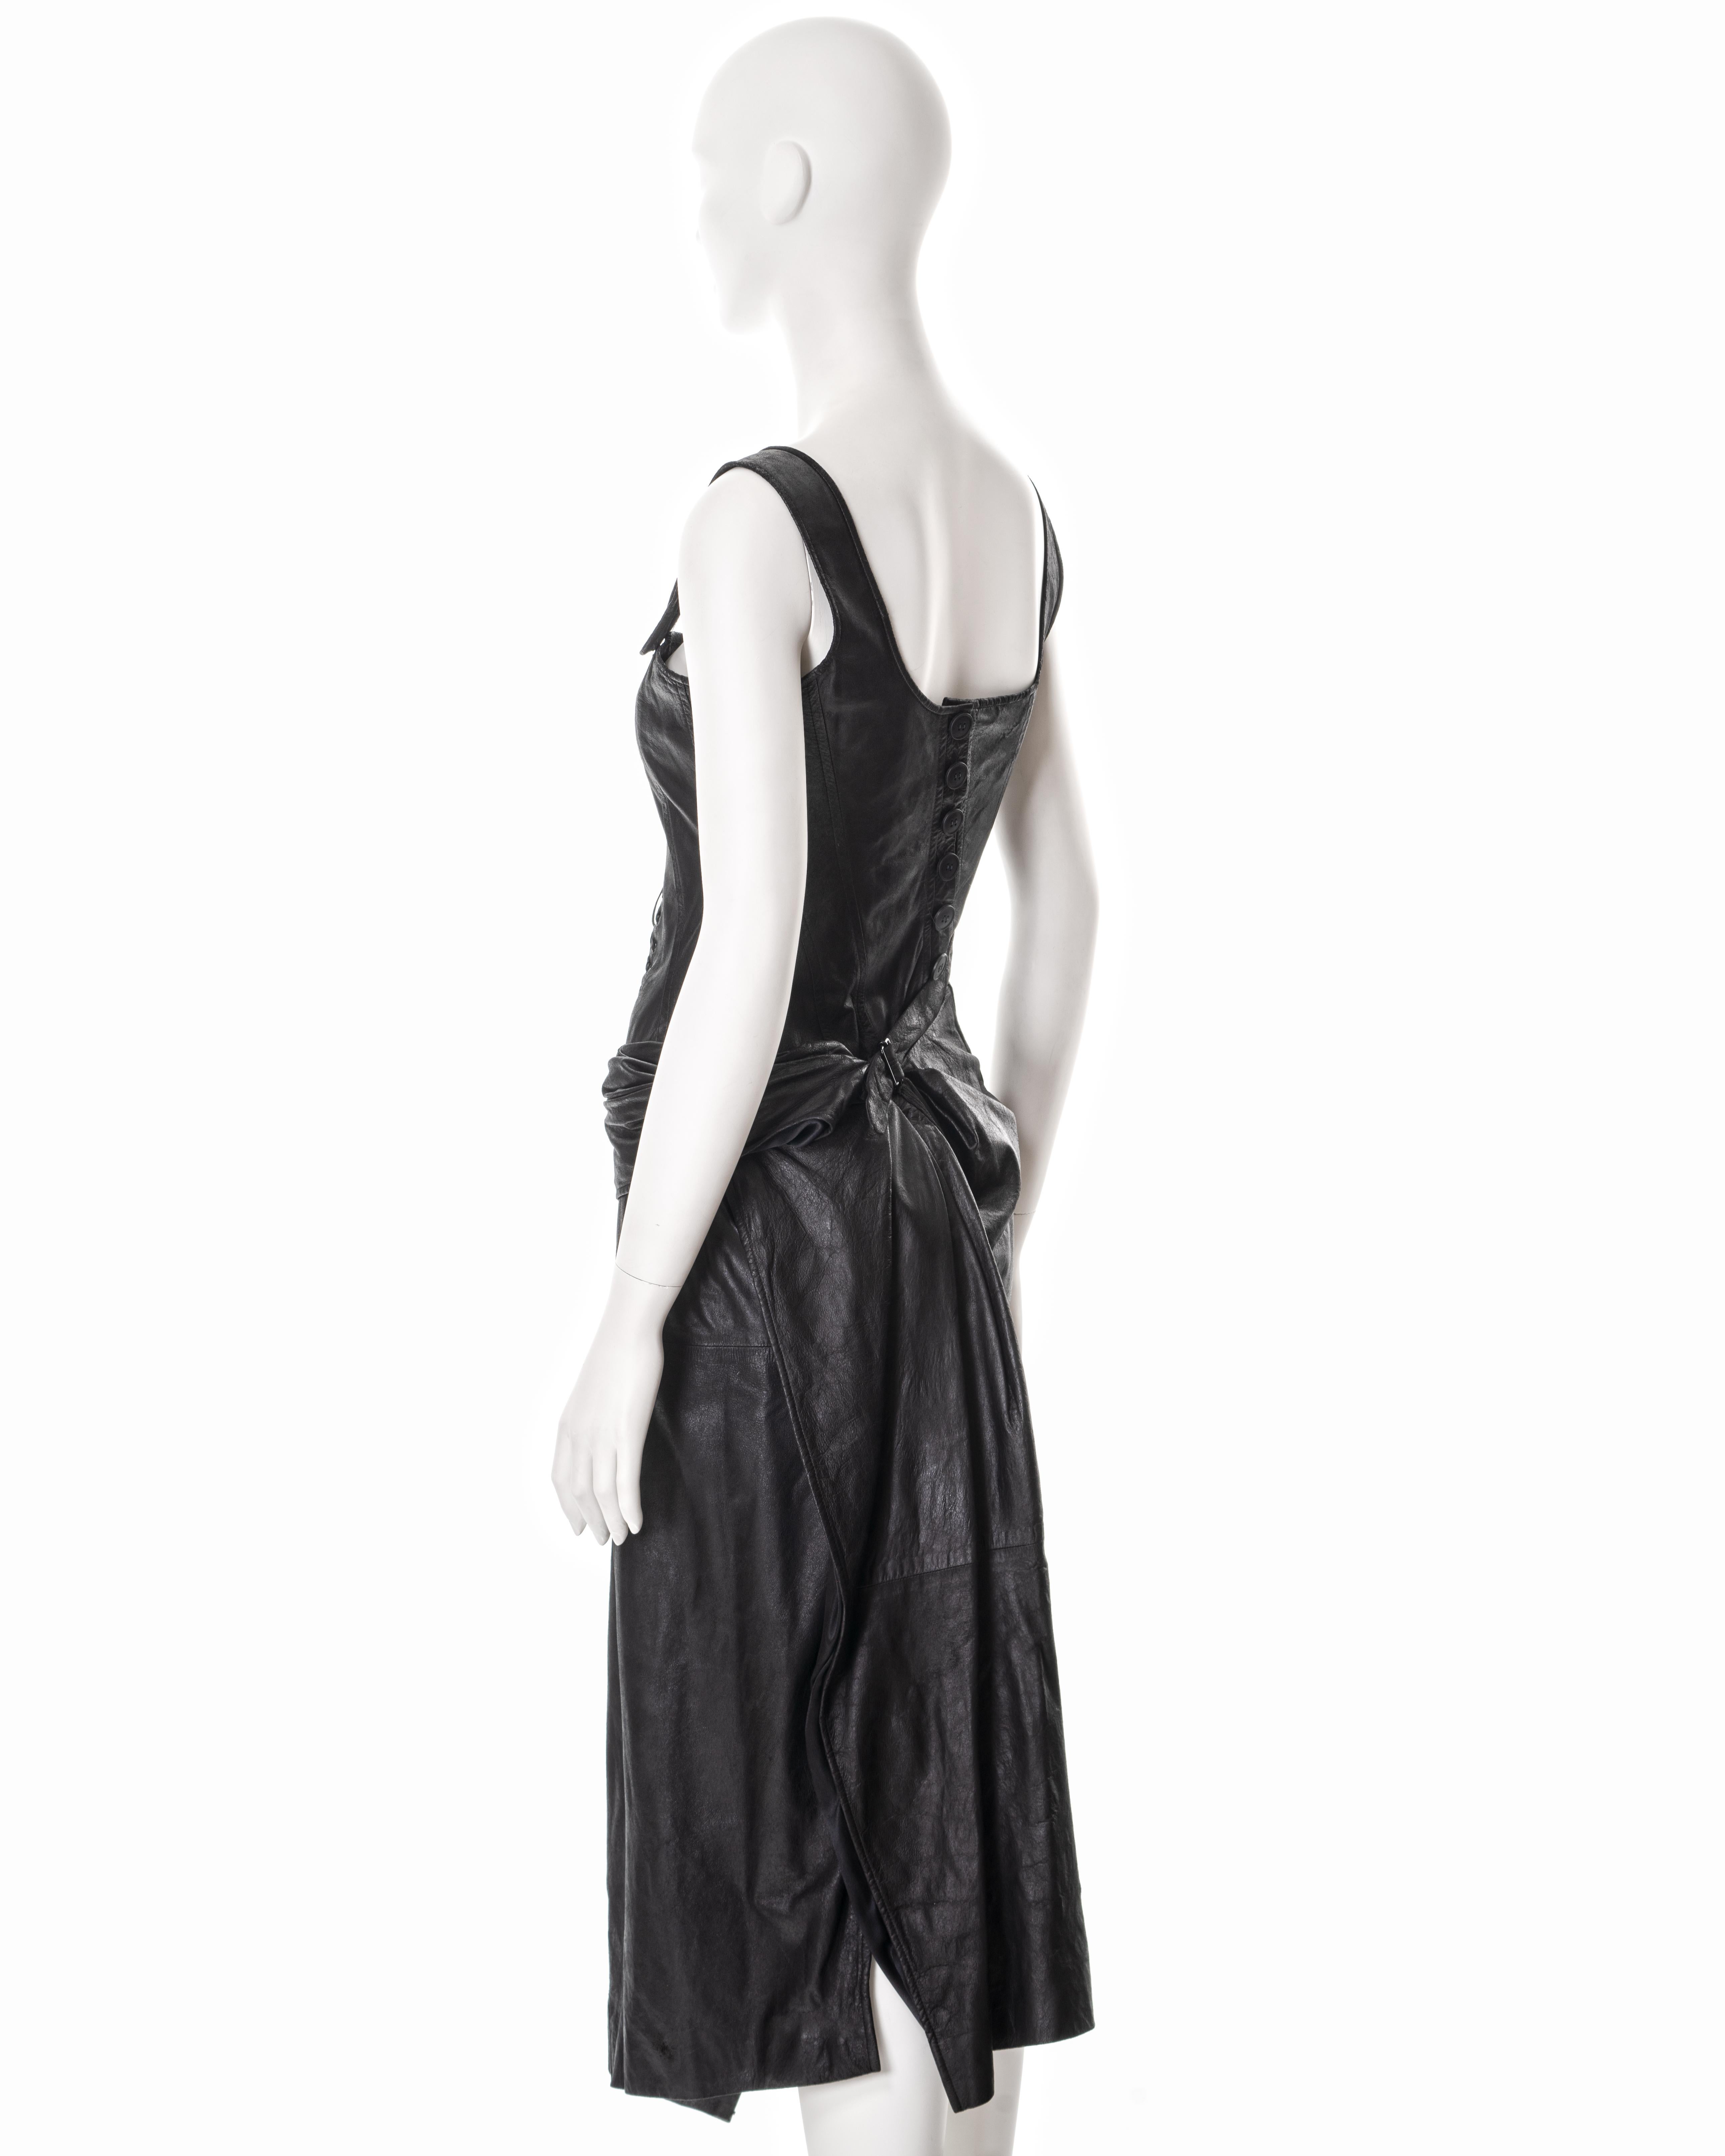 Christian Dior by John Galliano black leather deconstructed dress, ss 2000 6